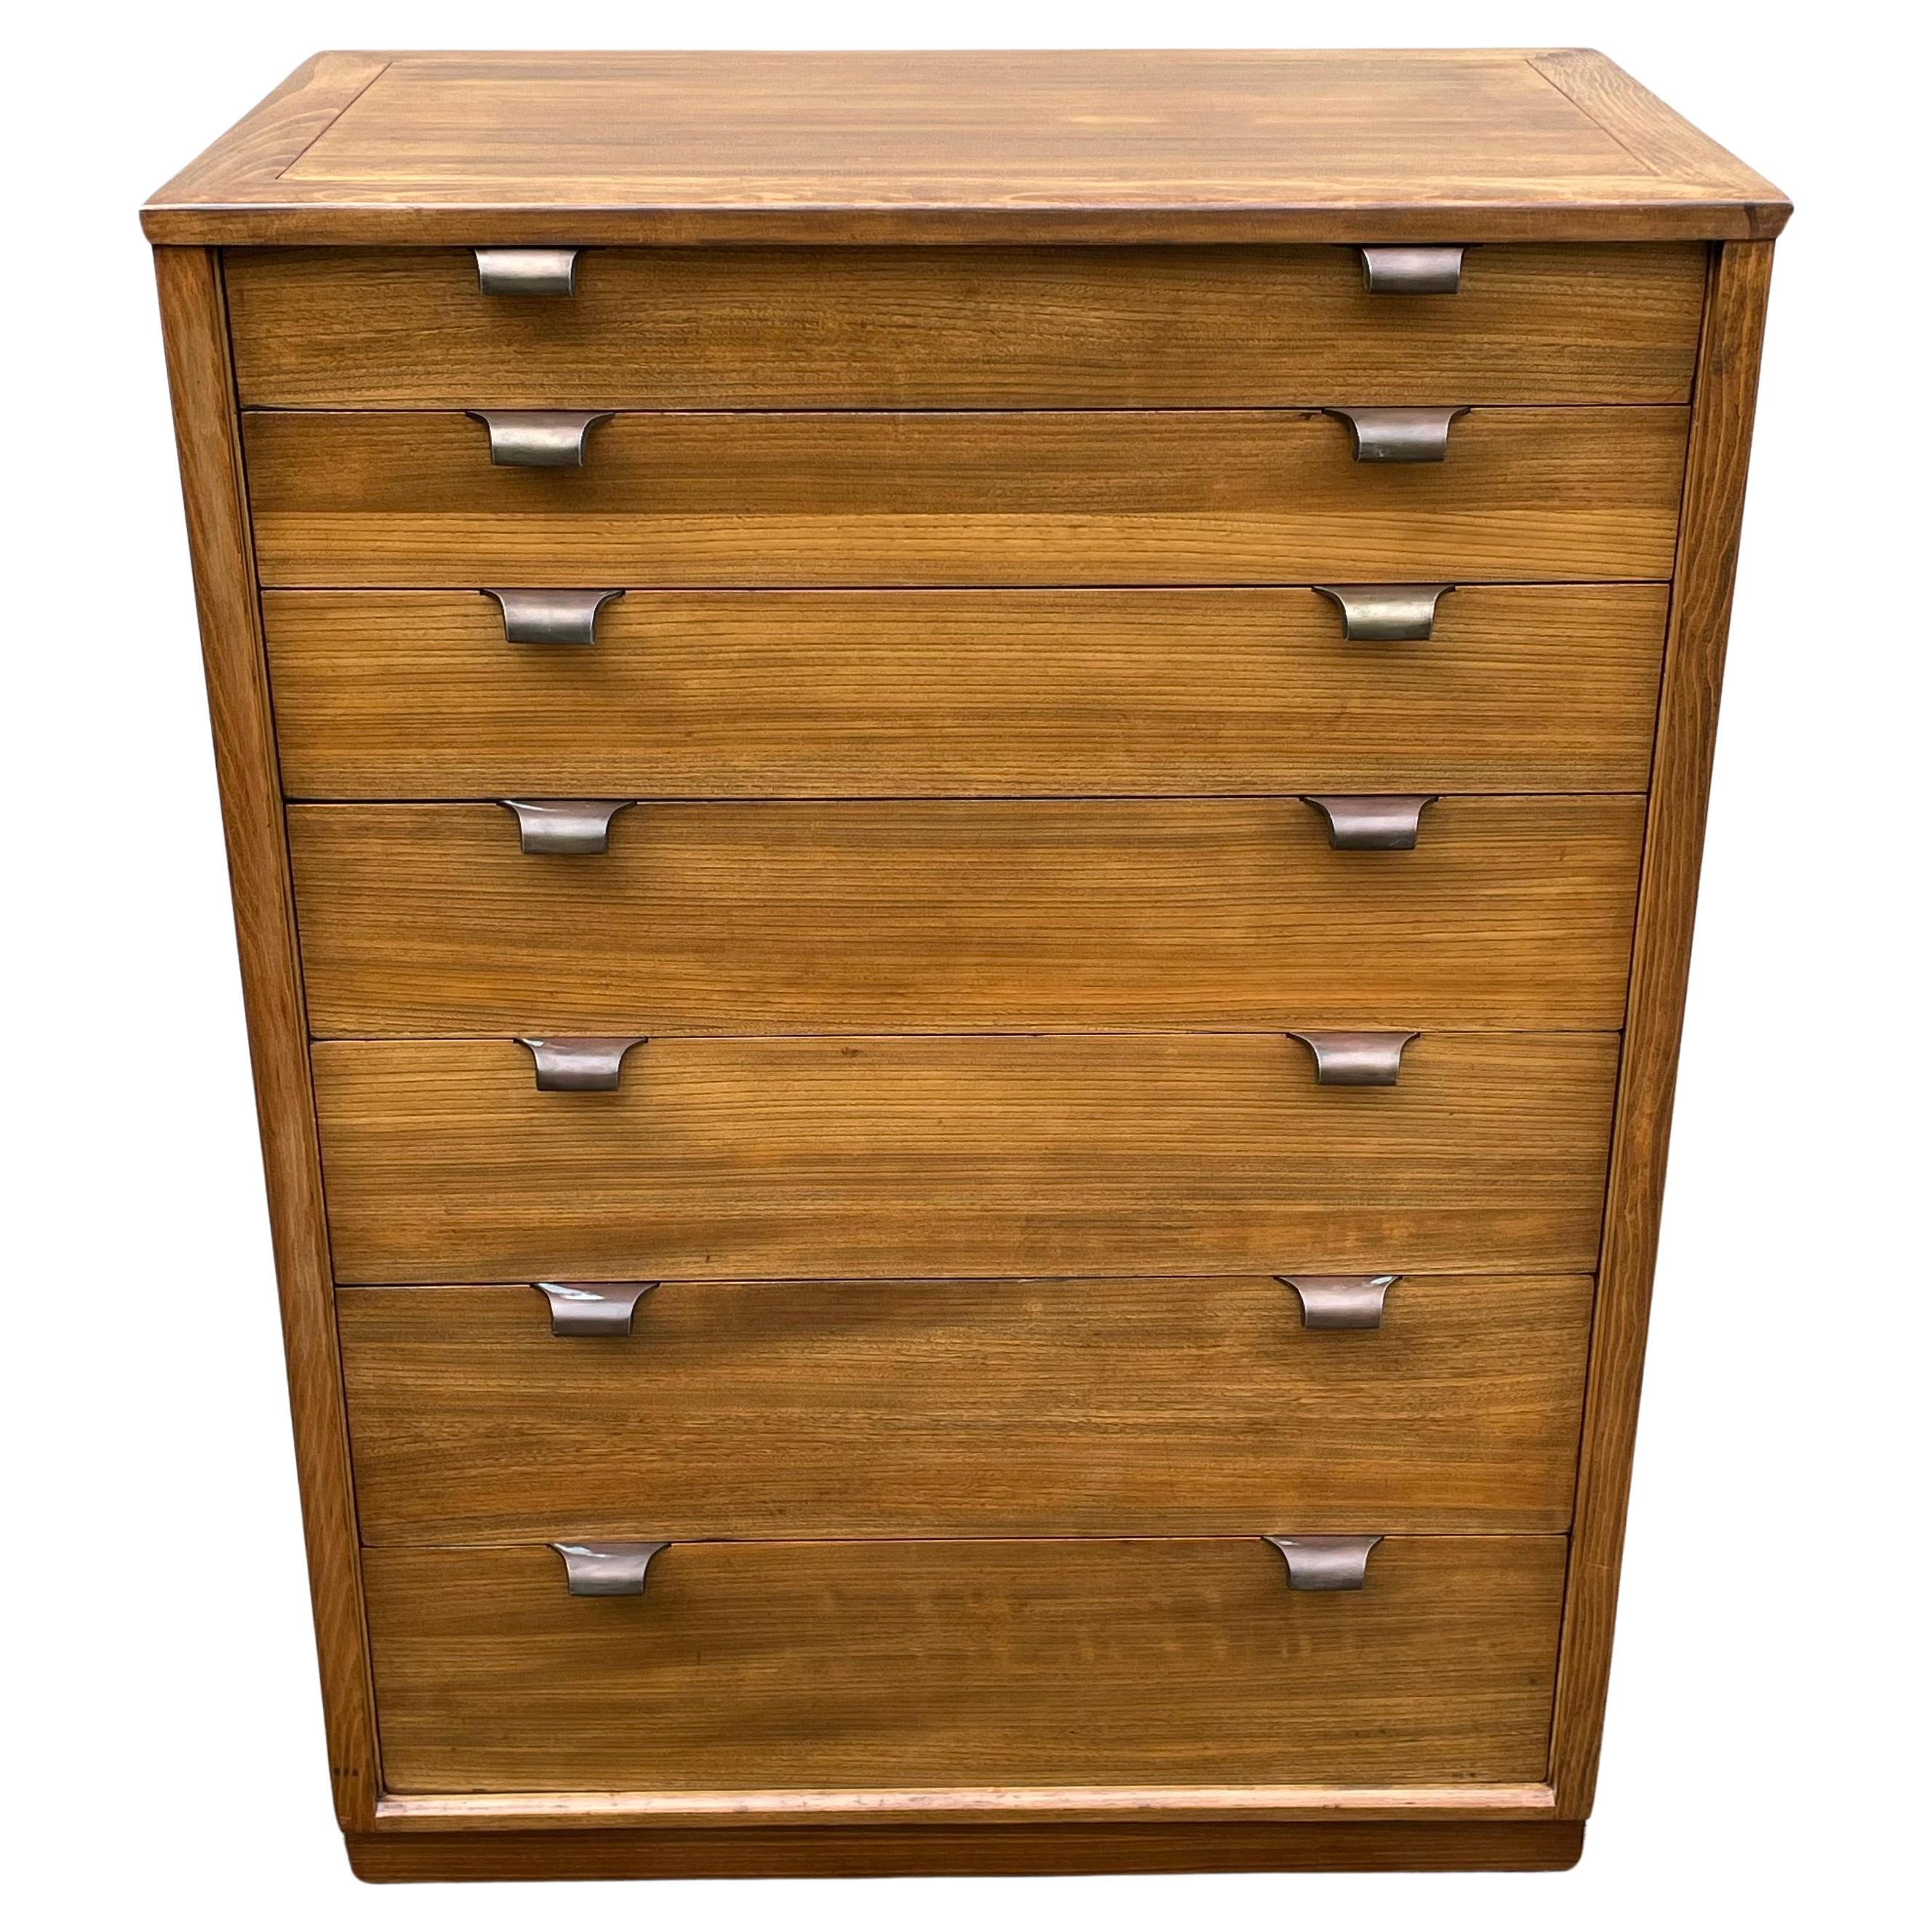 Mid Century Dresser by Edward Wormley for Drexel, Precedent Series, 1950's For Sale